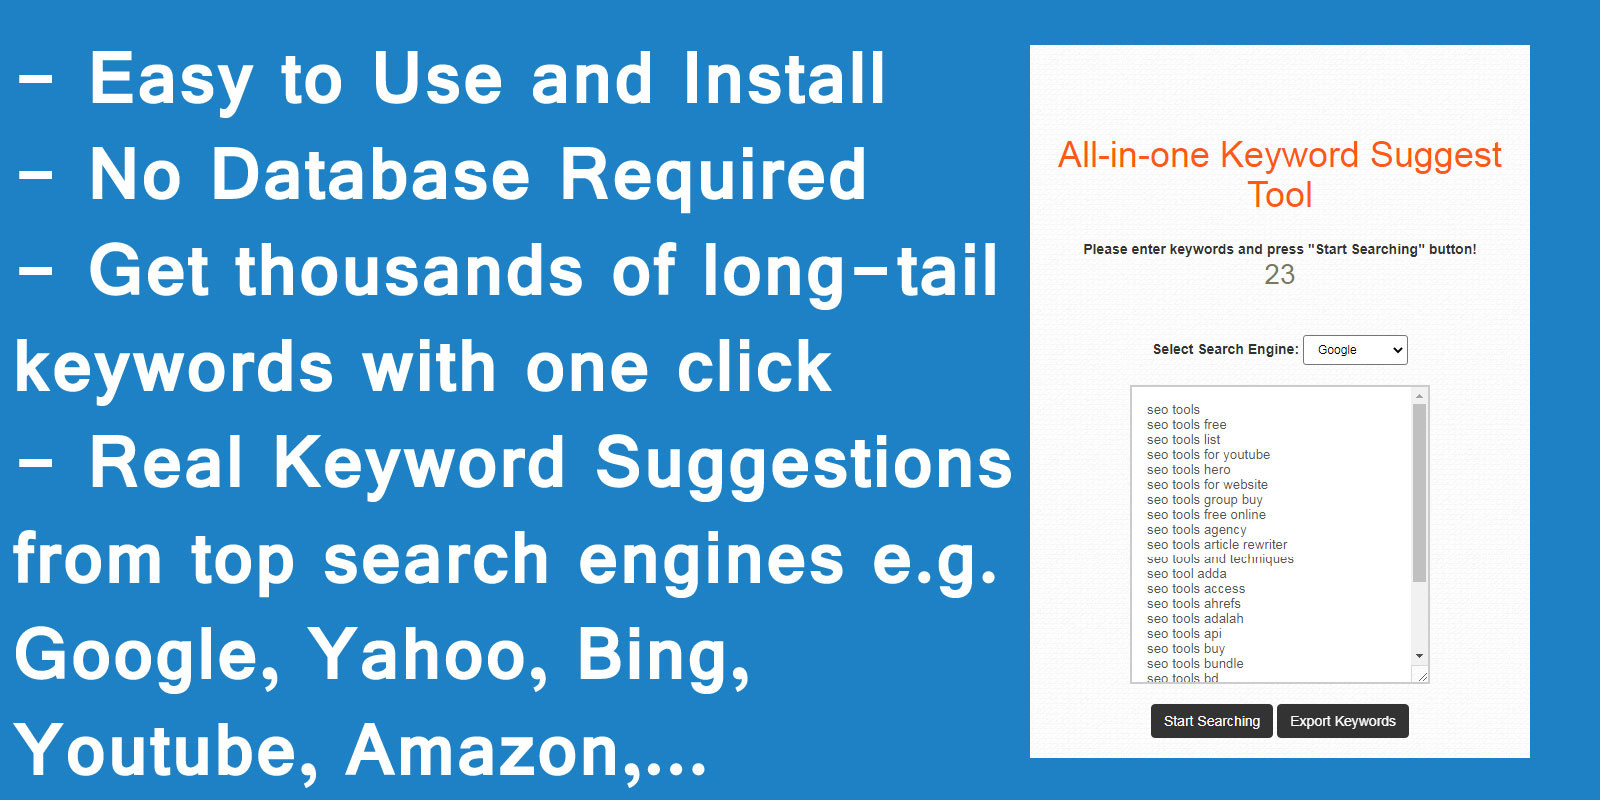 All in one Keyword Suggest Tool